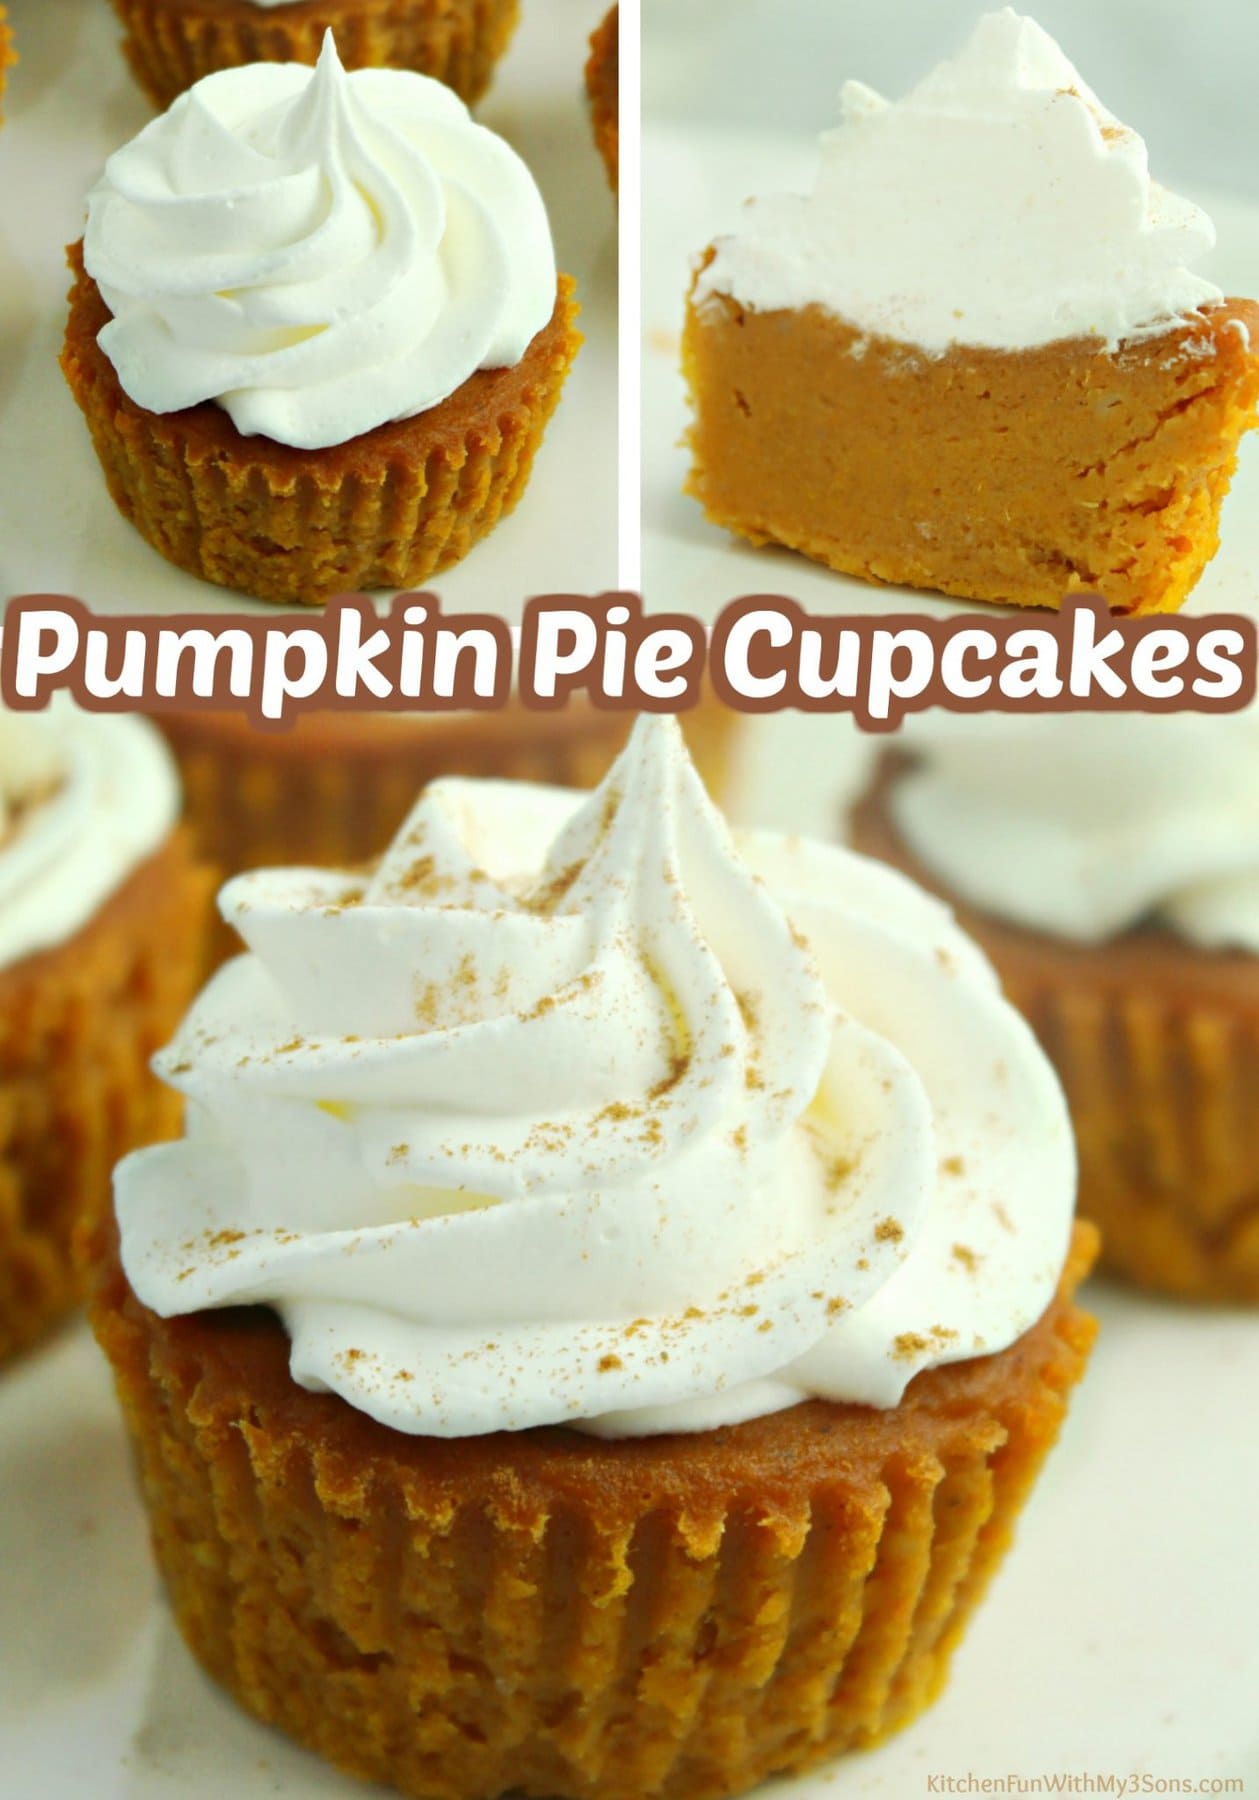 Mini pumpkin pies topped with piped whipped cream